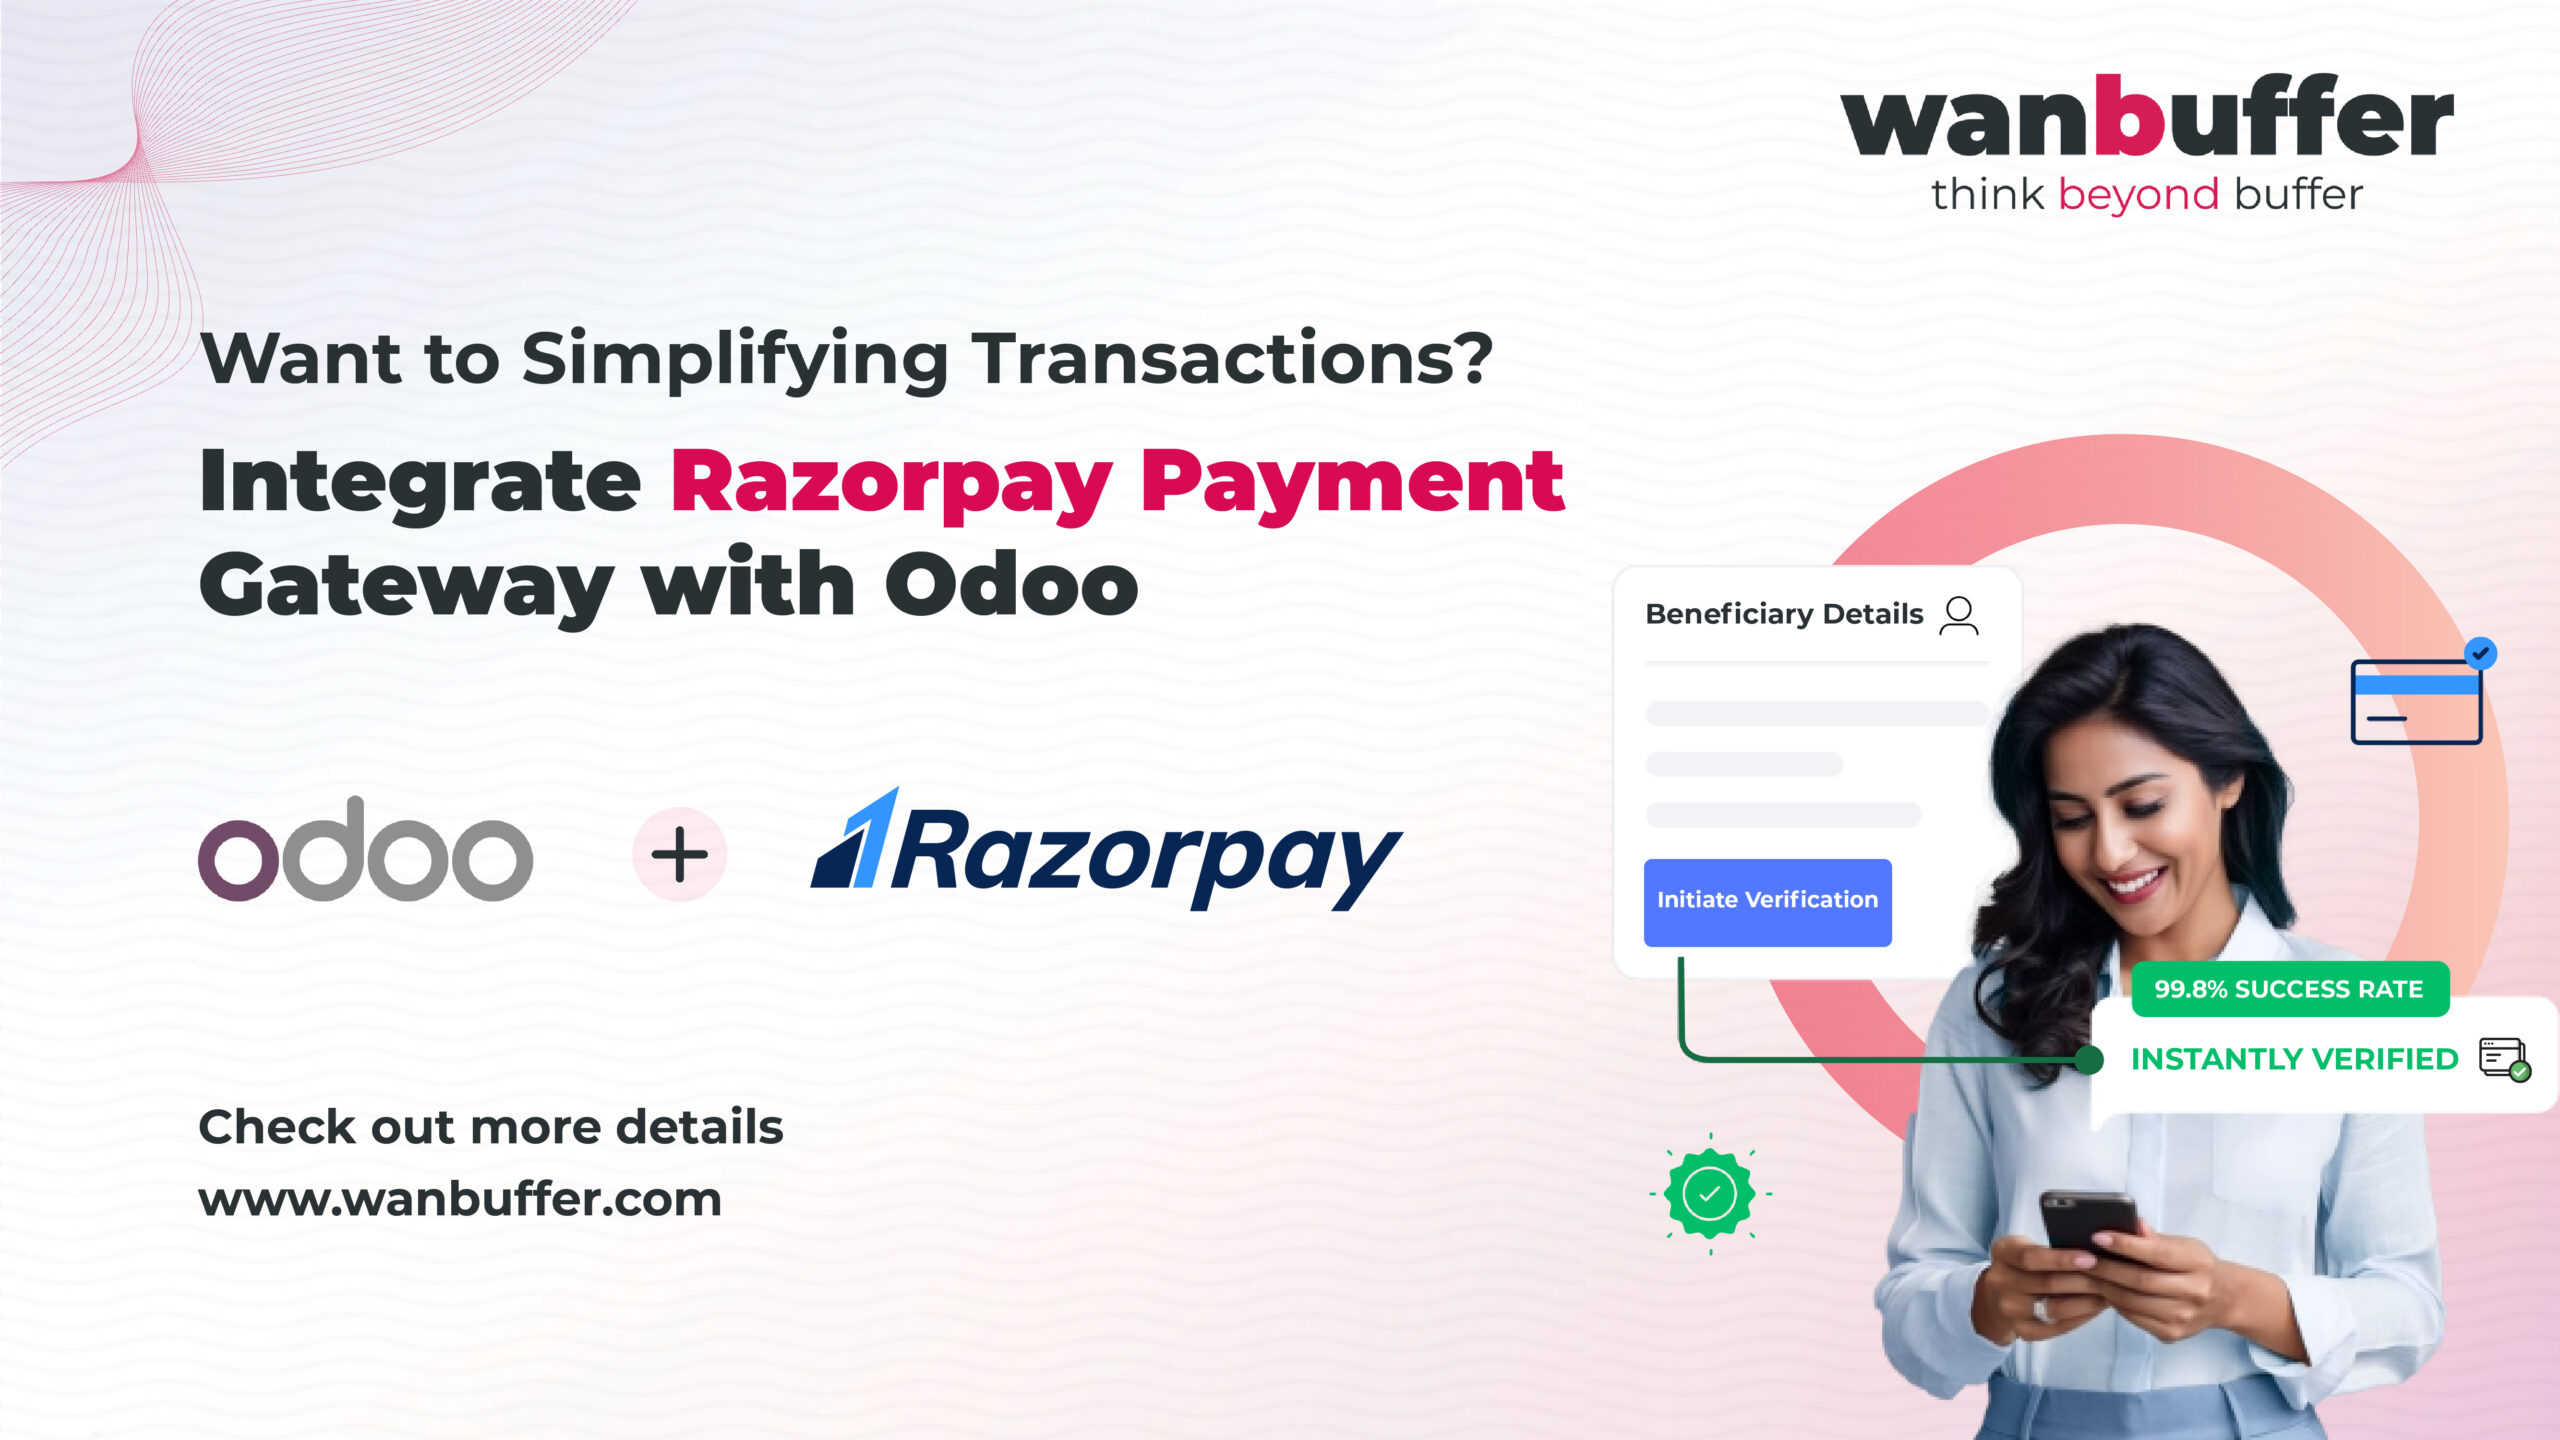 Want to Simplifying Transactions? Integrate Razorpay Payment Gateway with Odoo